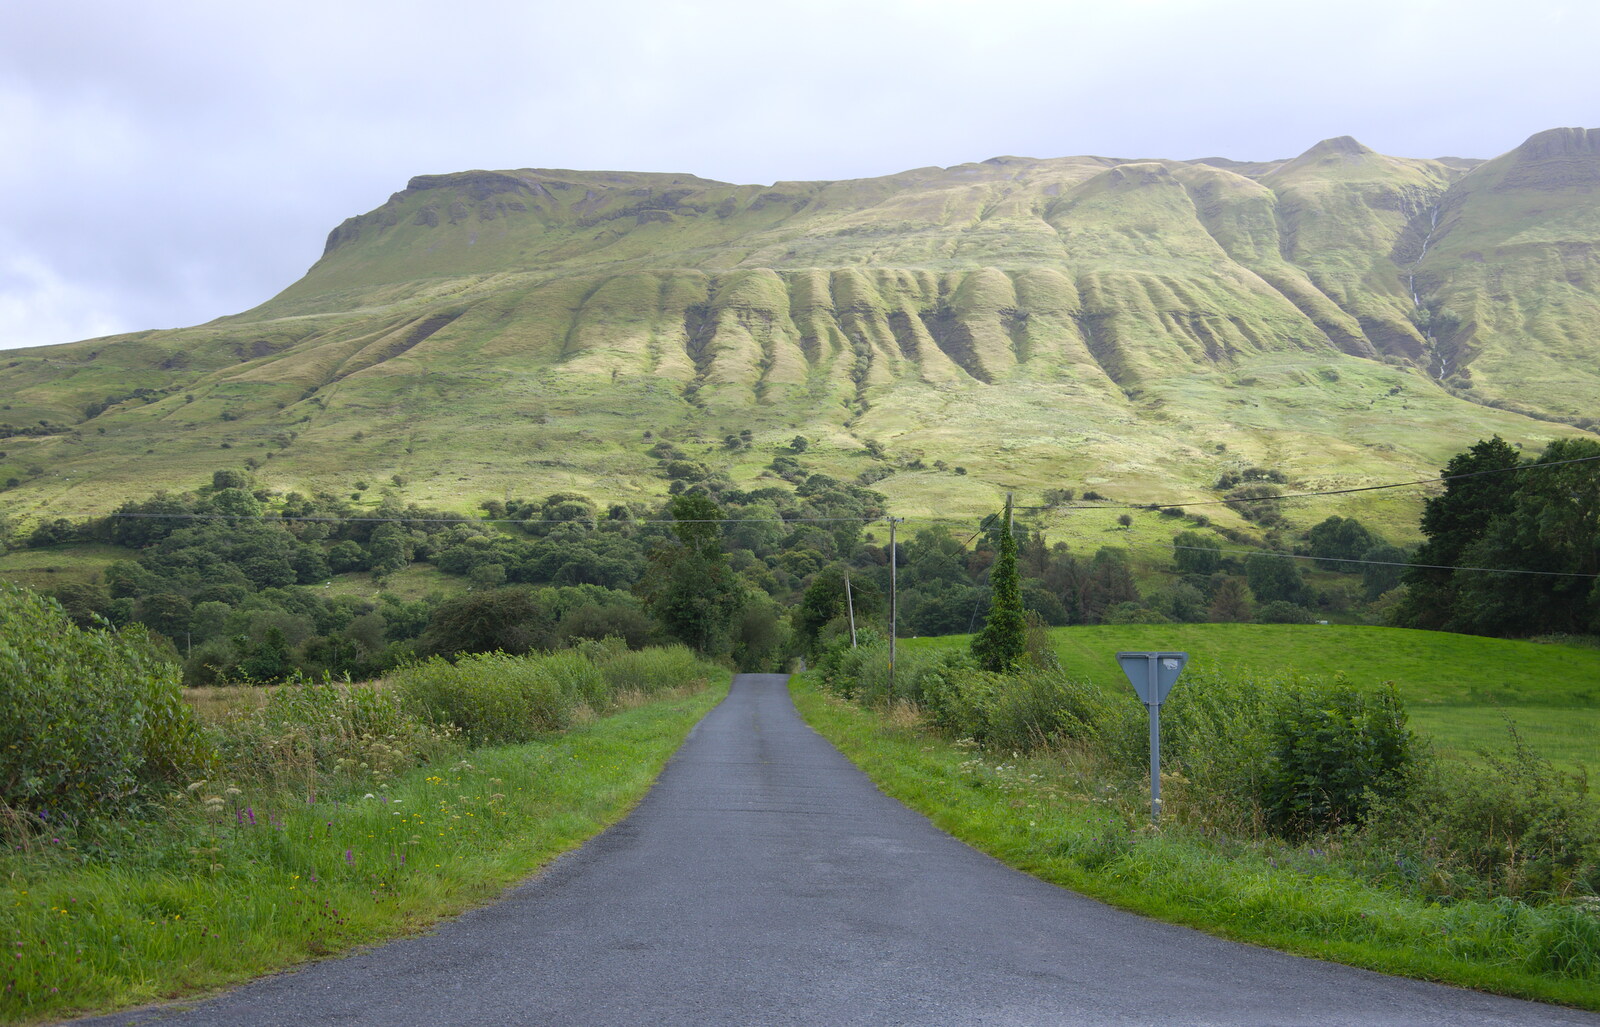 A road to somewhere from Mullaghmore Beach and Marble Arch Caves, Sligo and Fermanagh, Ireland - 19th August 2019